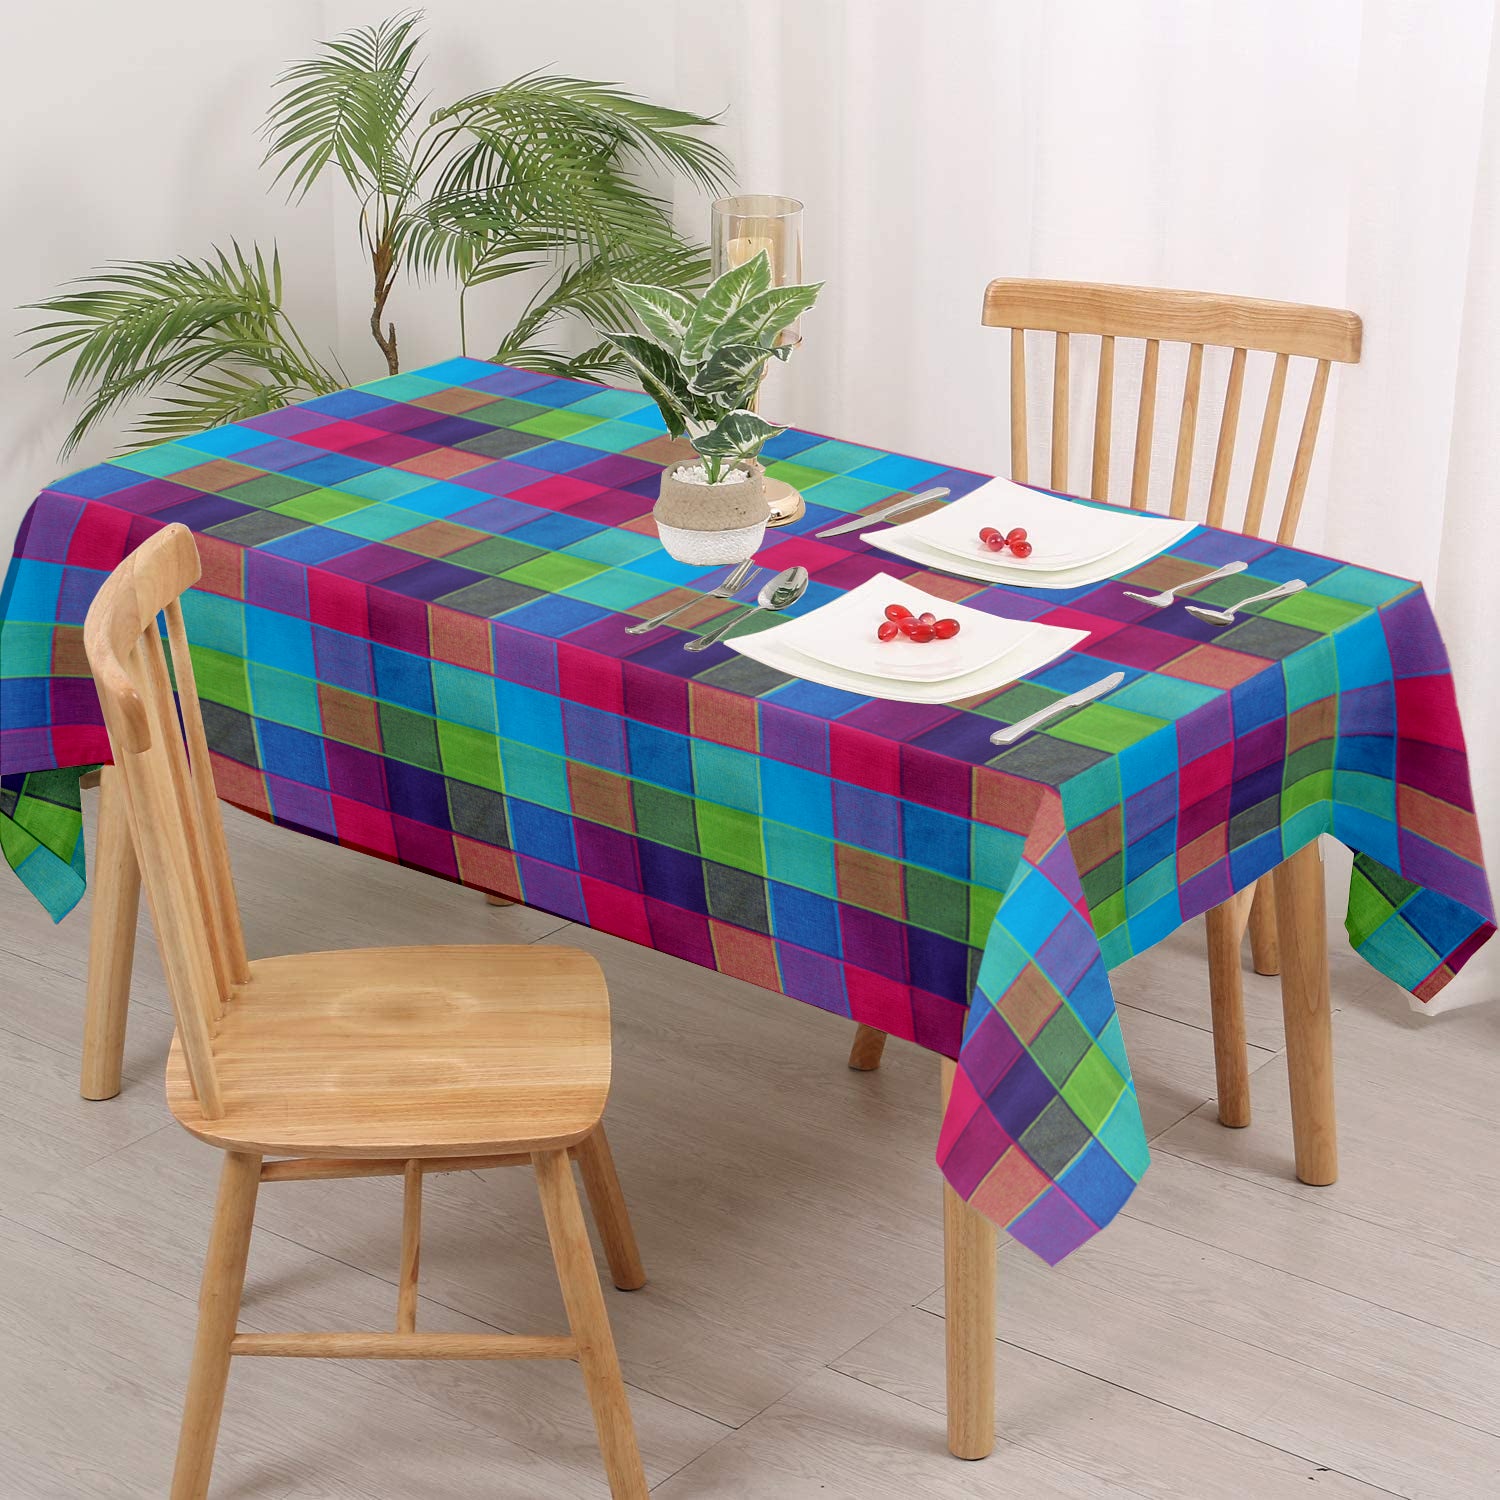 Lushomes table cloth Cotton, center table cover, table cloth for centre table, Also Used As table cloth for study table, Multi Checks Table Cover with 1 Cms Hem (Pk of 1, Size: 36x60 Inch, 3x5 FT)